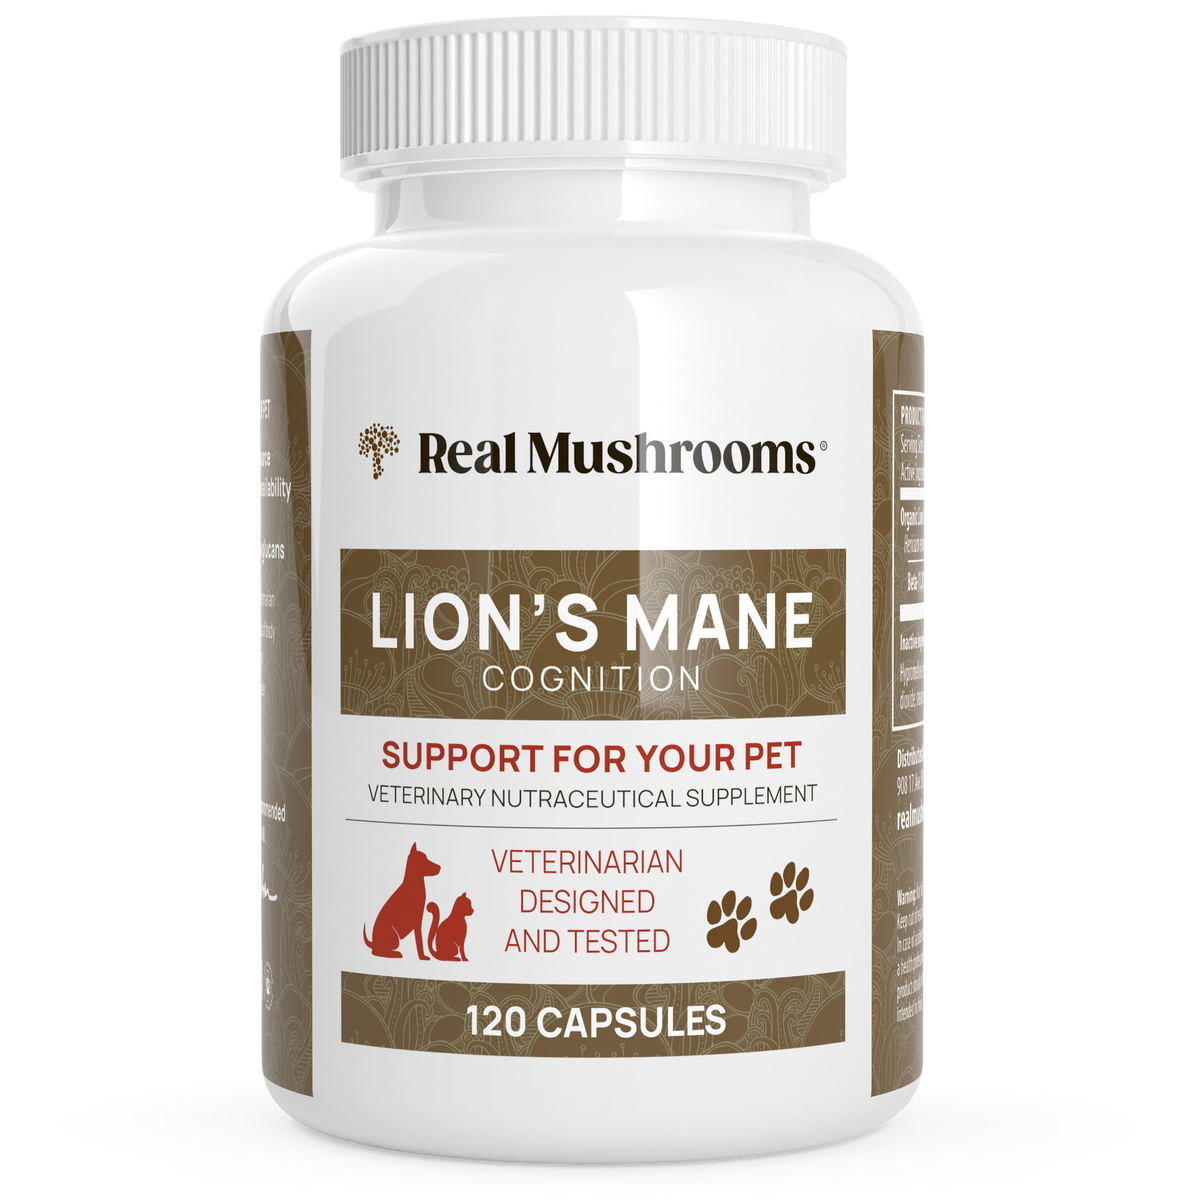 Organic Lions Mane Extract Capsules for Pets by Real Mushrooms